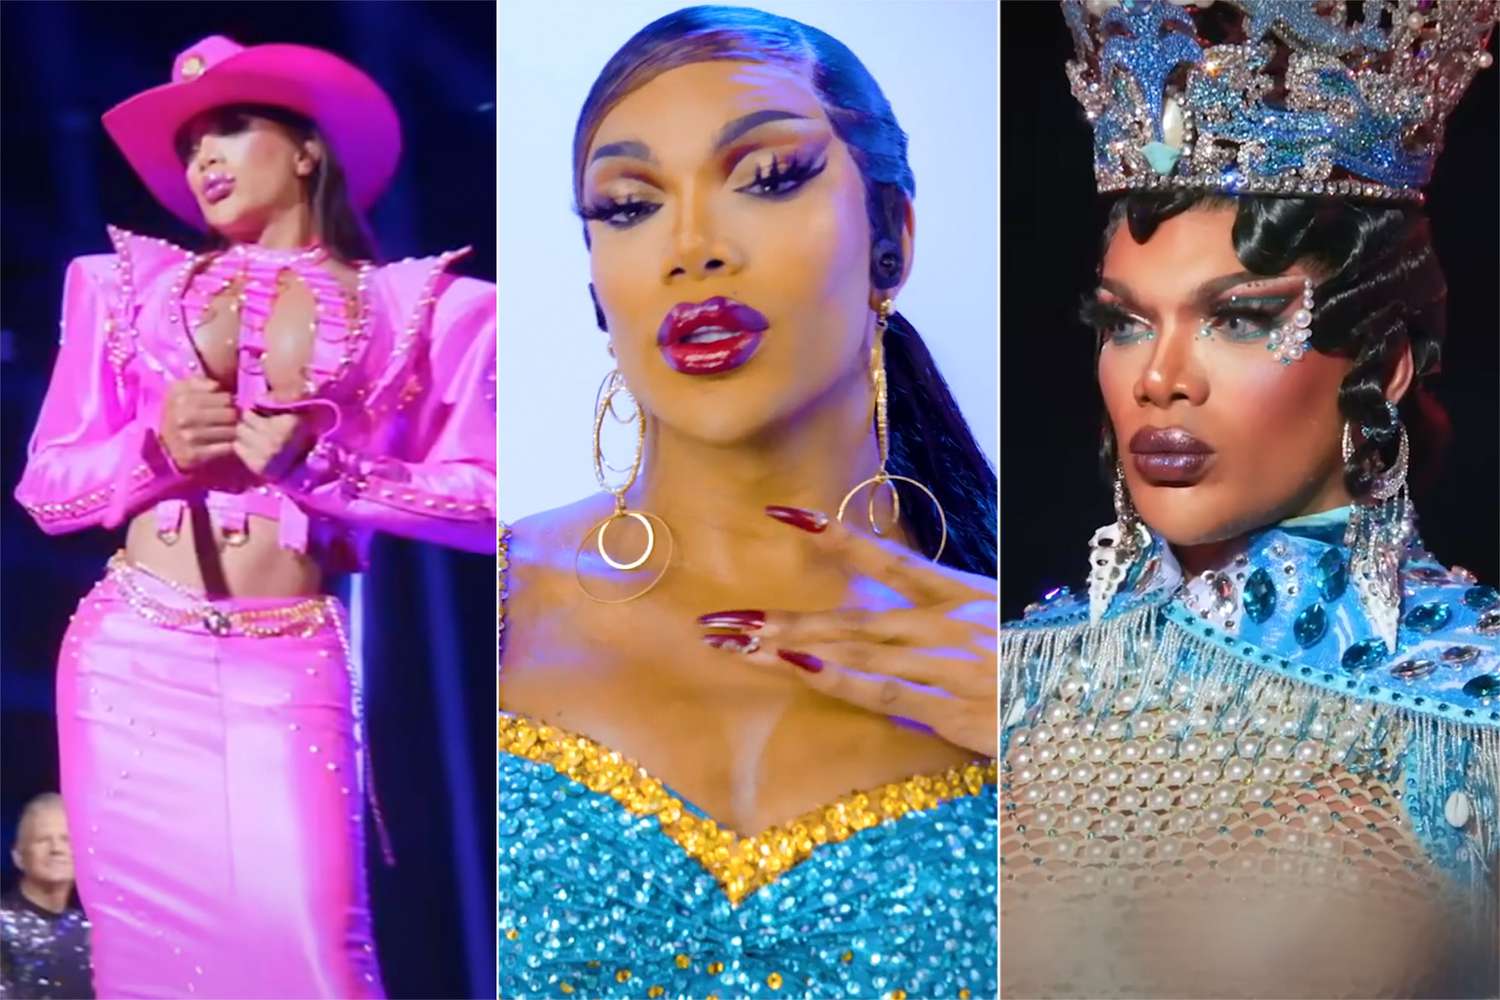 'Drag Race All Stars 8' cast reveals who has the biggest runway glow-up